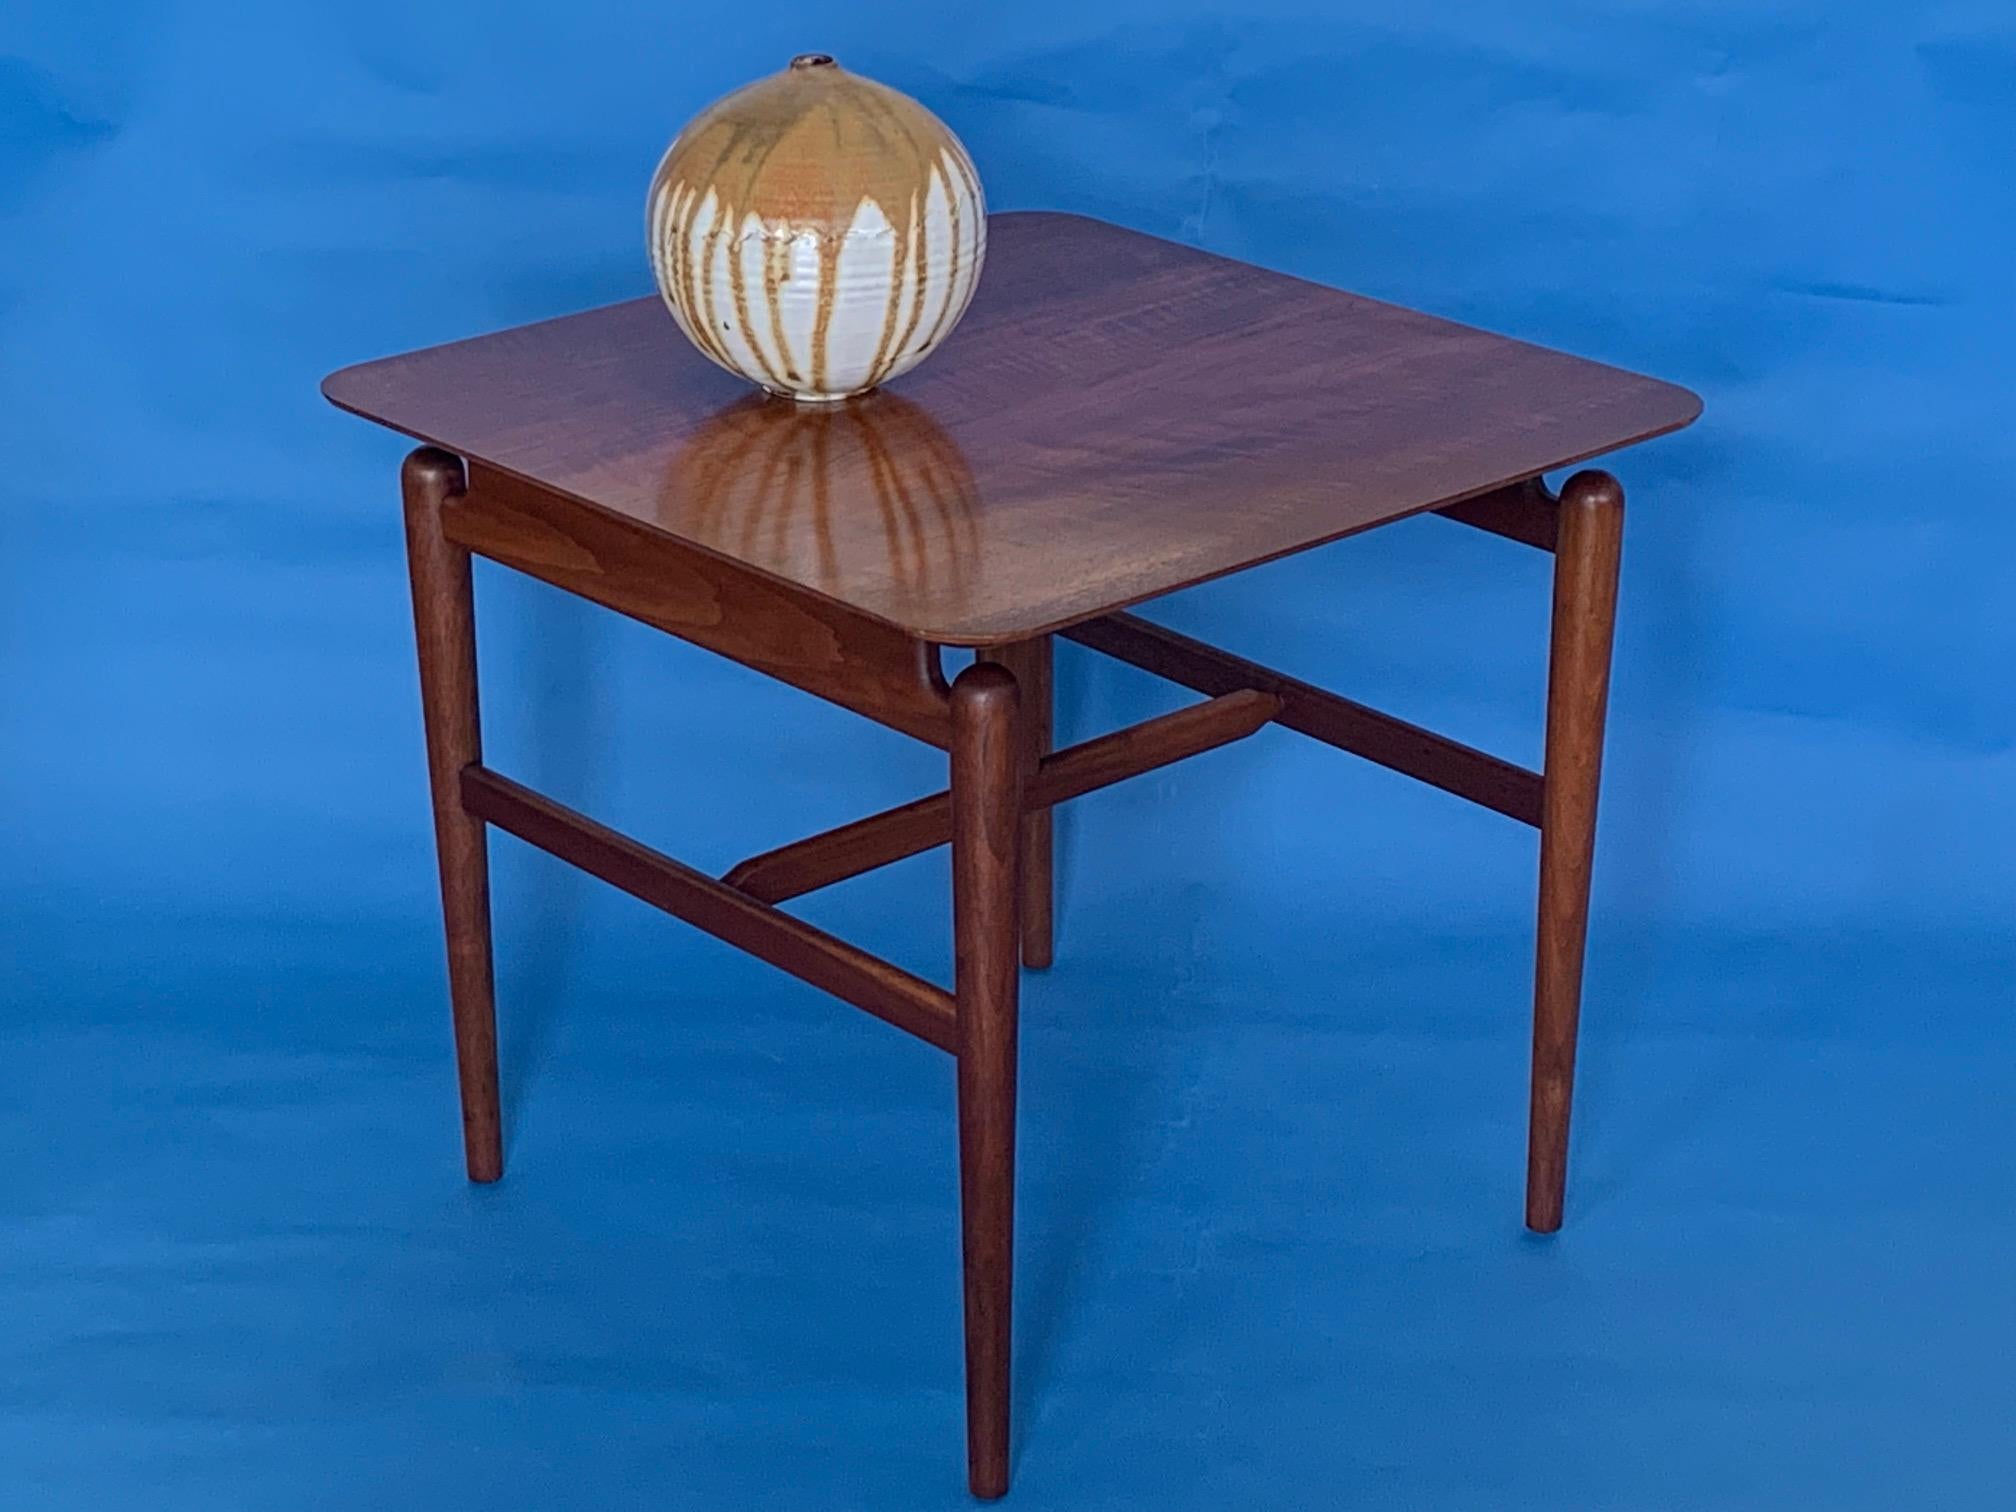 A classic occasional or lamp table designed by Finn Juhl and produced by Baker, circa 1950s. Beautiful American walnut with hand polished, floating top. Finely crafted in the great Baker Furniture tradition.